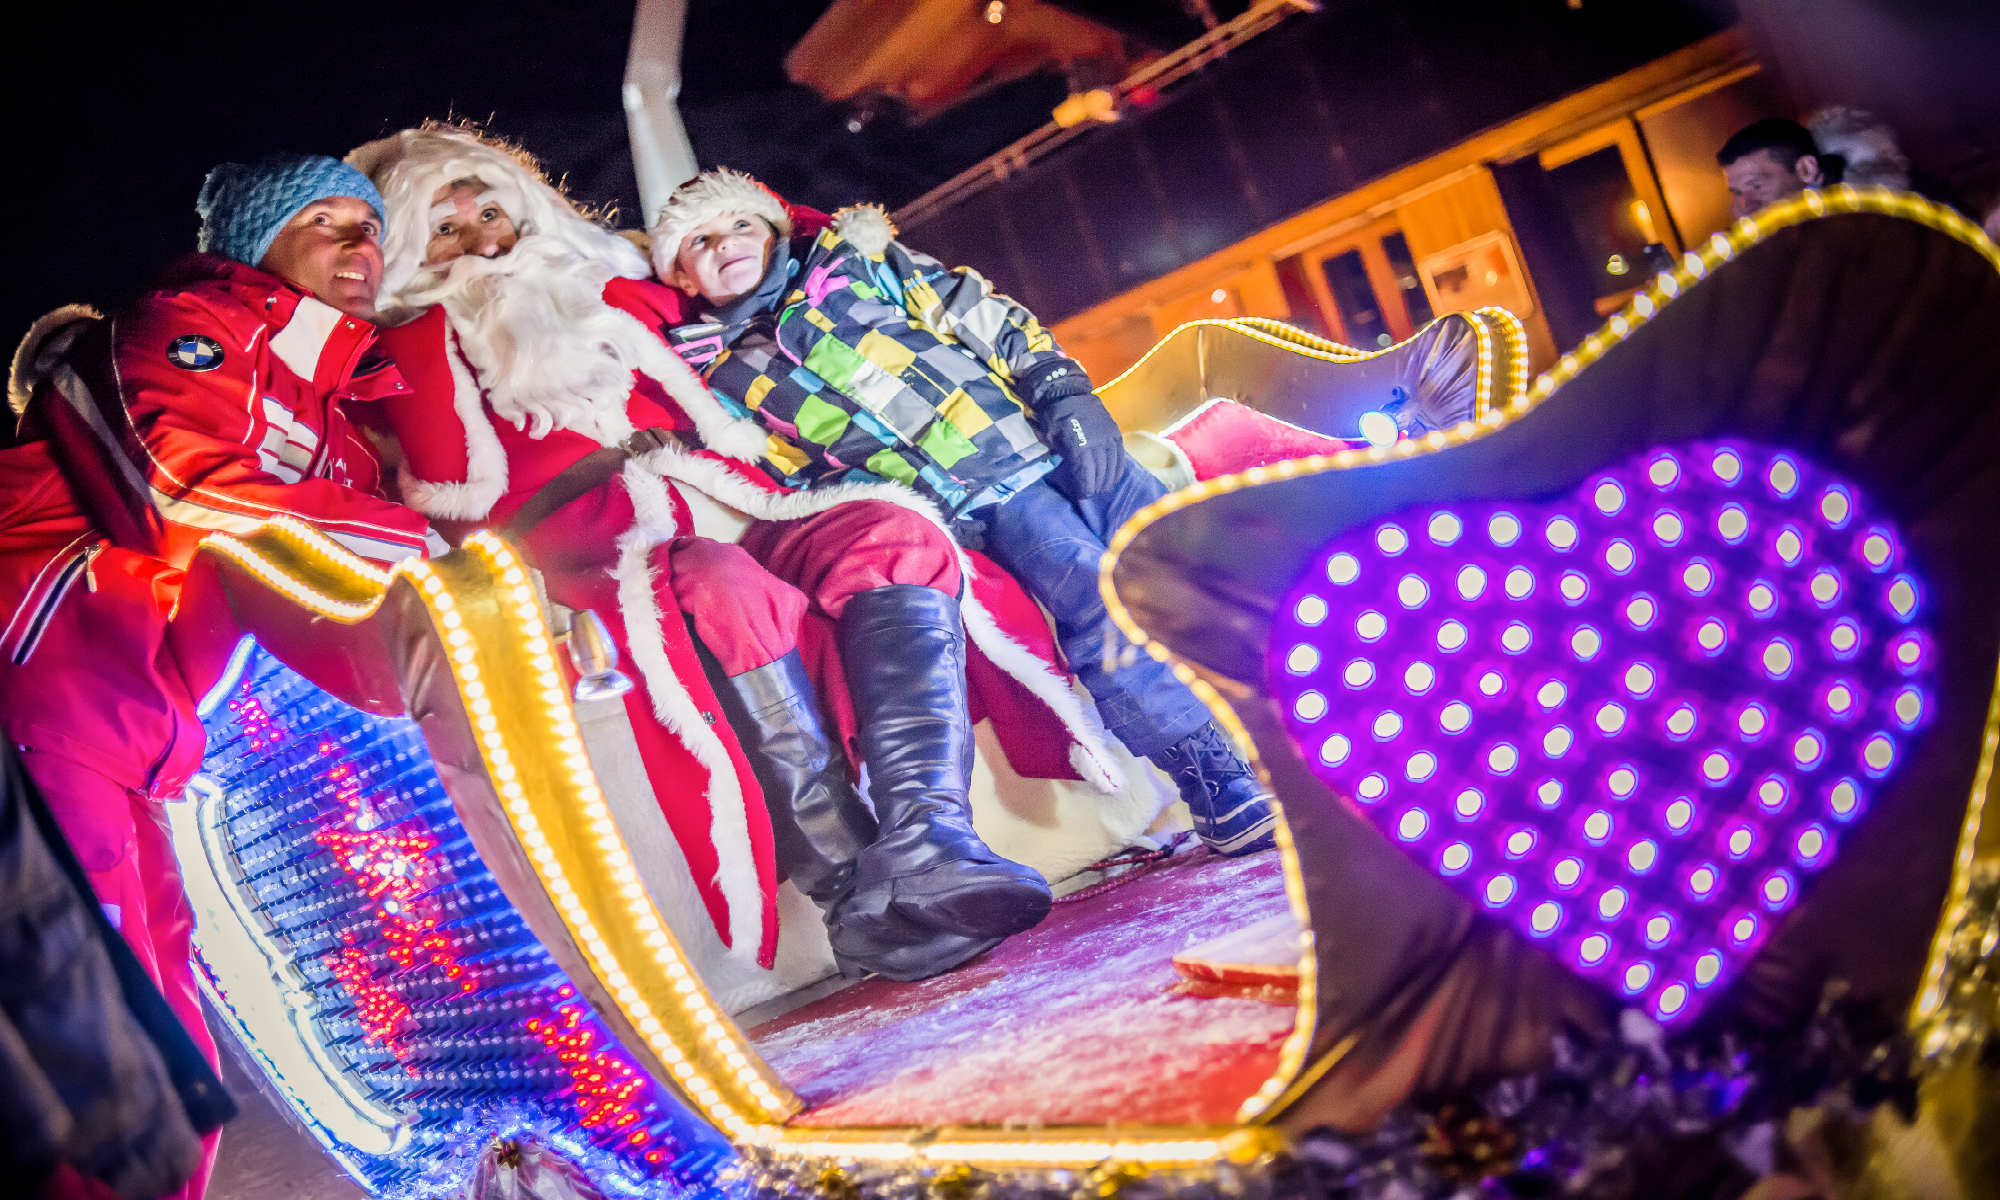 Santa Claus is posing for a picture in his sleigh together with a happy family in Tignes.